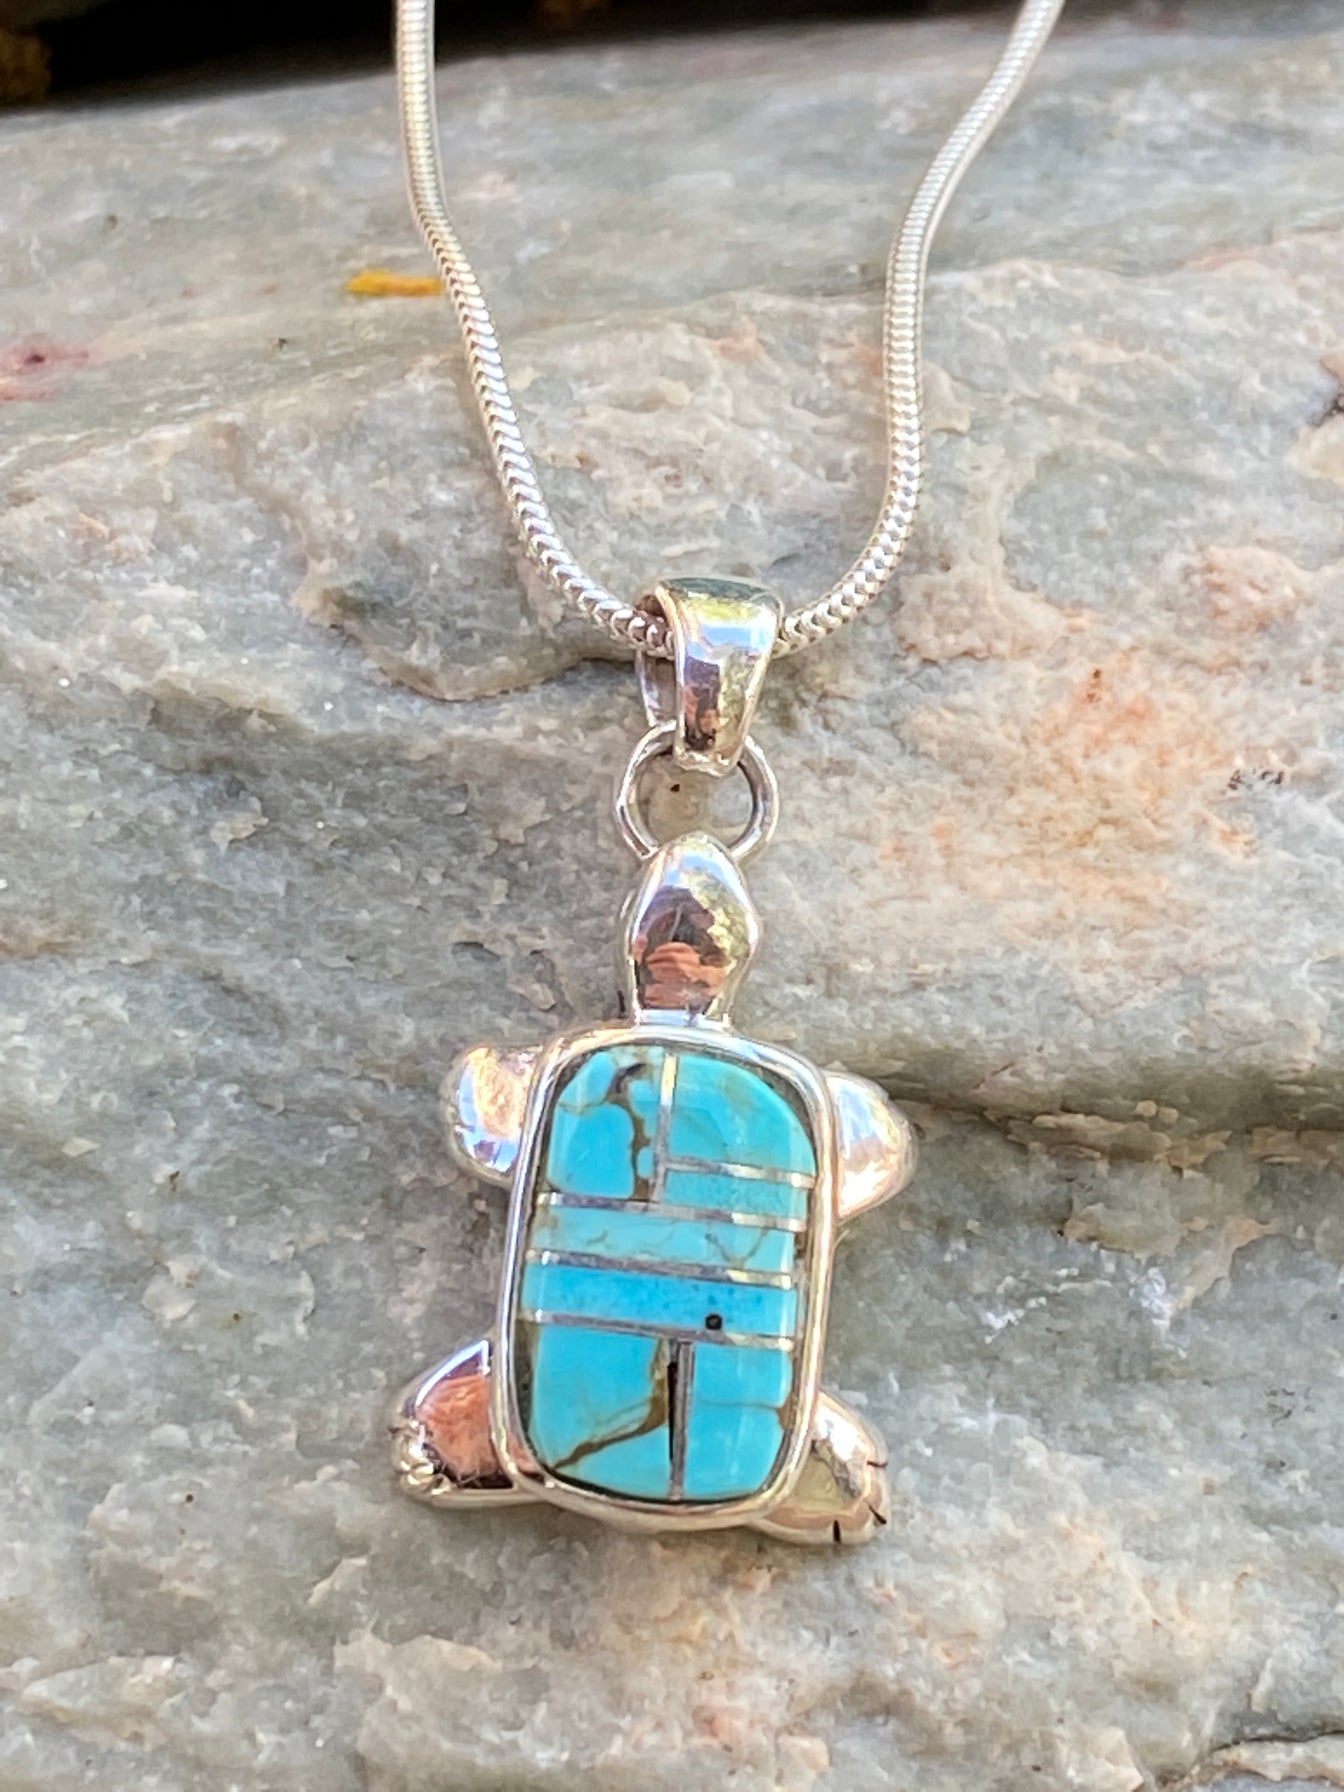 Spider Web Turquoise #8 Turtle Pendant & Sterling Silver Chain